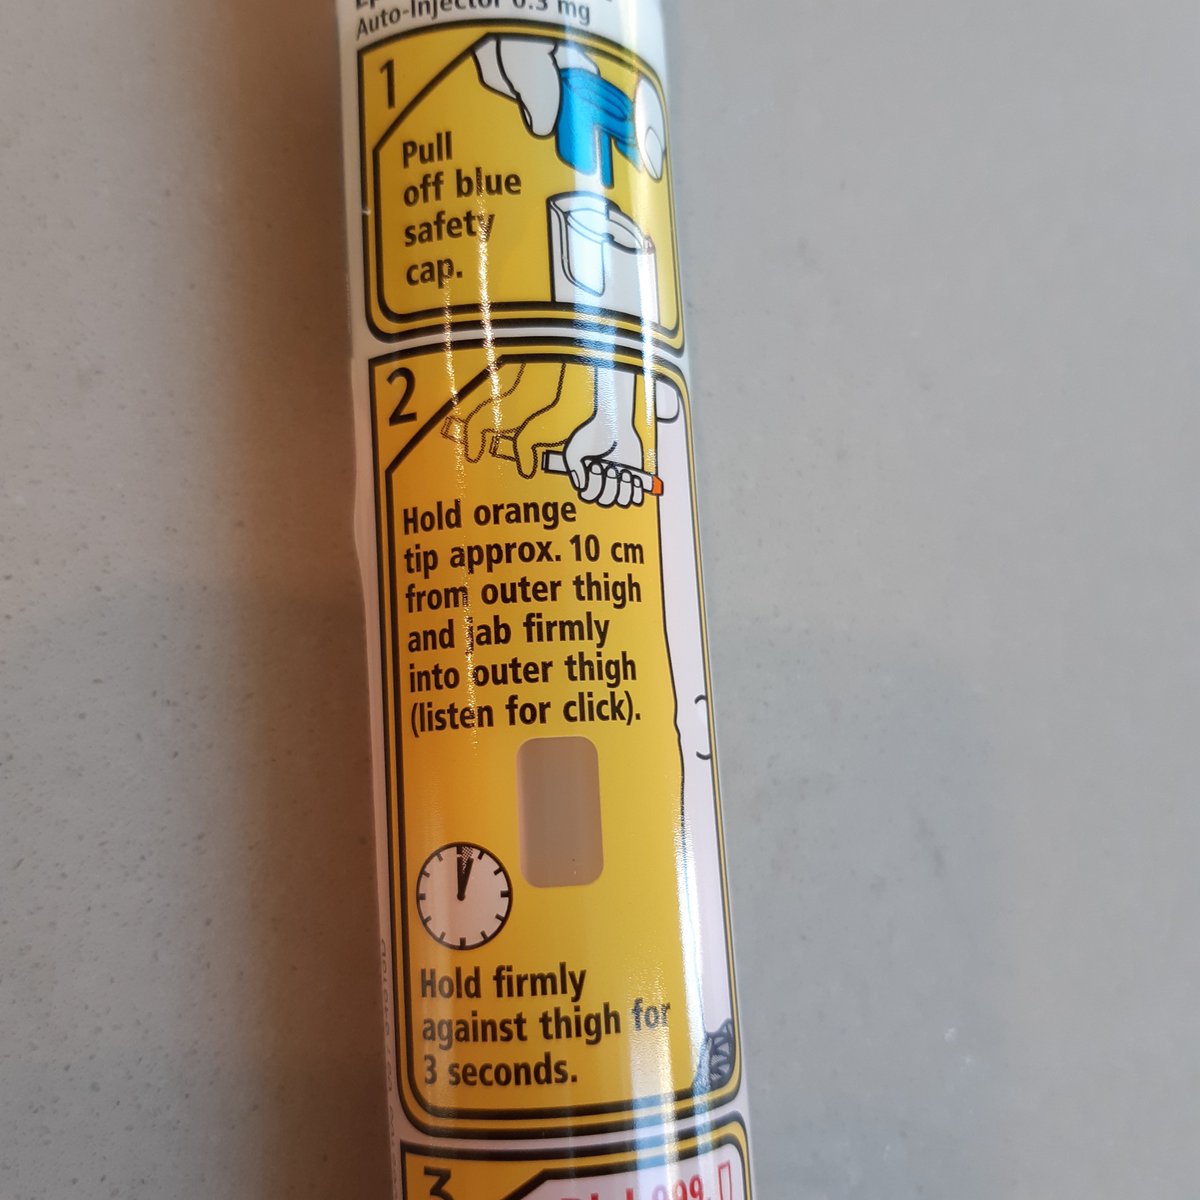 @AmyOverend @drphilippakaye @thismorning The amount of time depends on the device, epipen advice has changed from 10 seconds to 3 I believe as my daughters epipens say 3 seconds. 

So the advice should be to read the individuals AAI before adminstering and follow the instructions written on there.